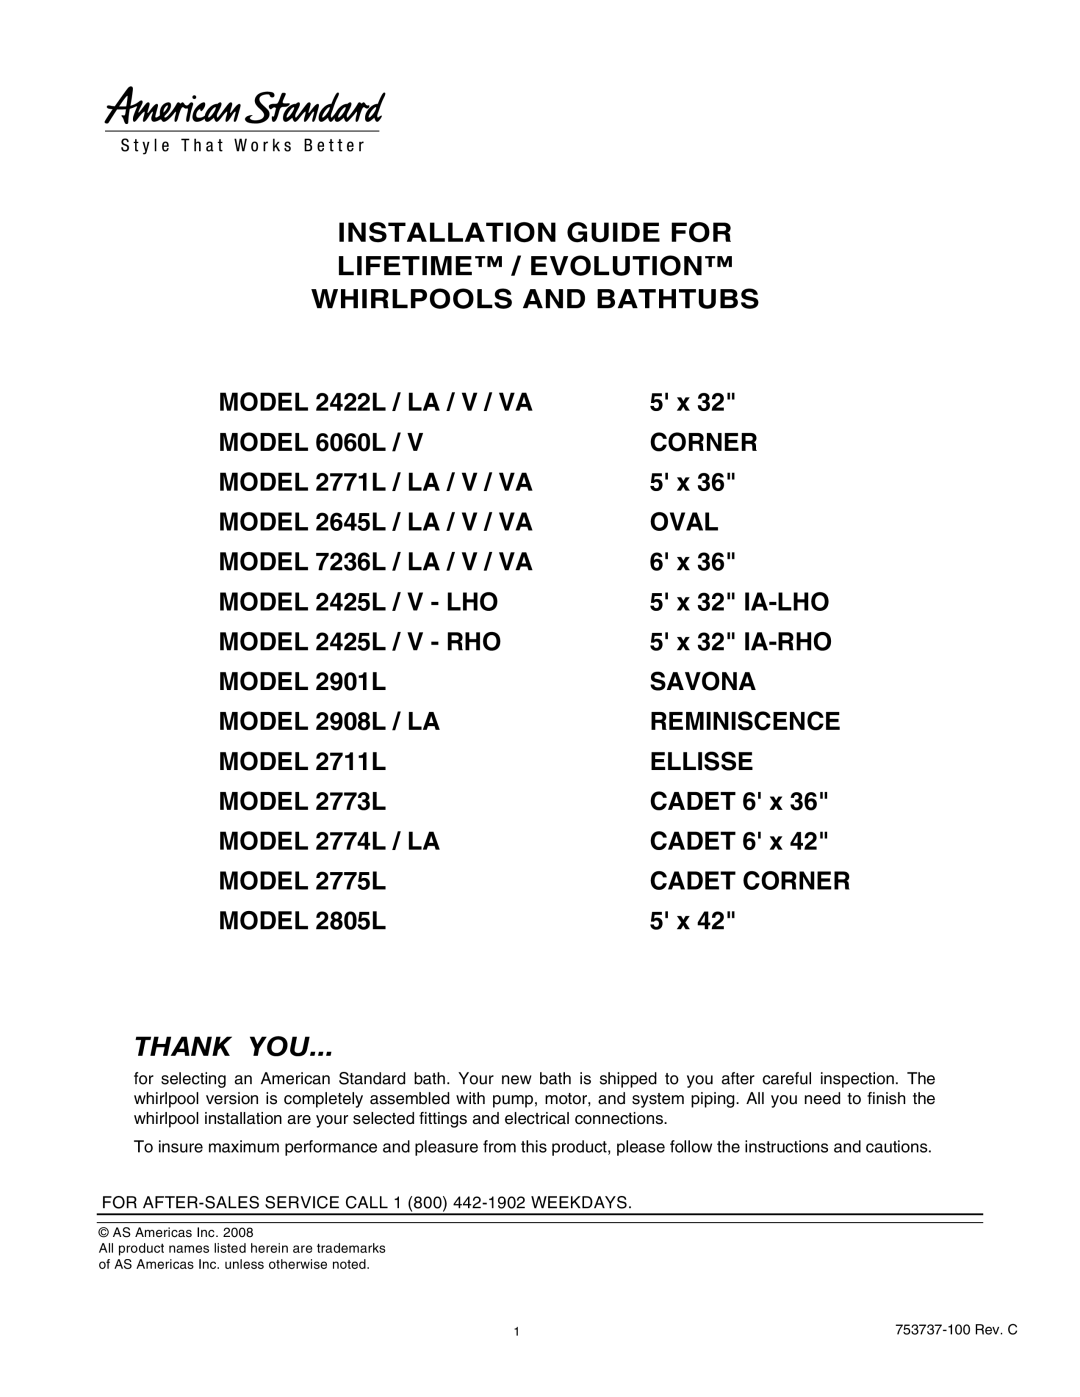 American Standard 2645L, 2422LA manual Installation Guide For Lifetime / Evolution Whirlpools And Bathtubs, Thank You 